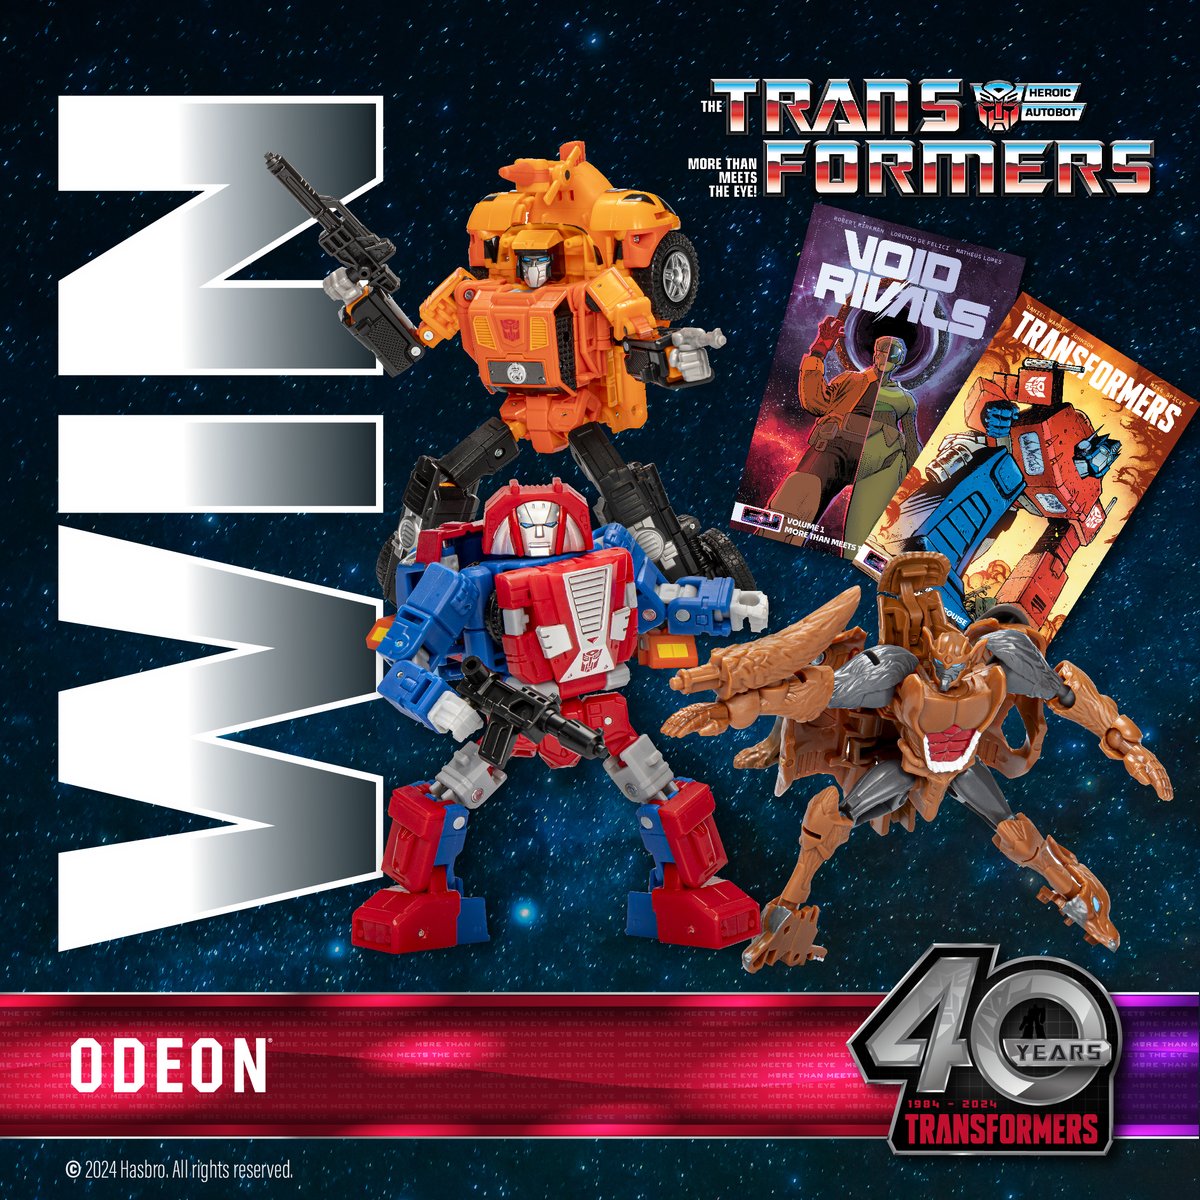 The #Transformers: 40th Anniversary Event is coming to ODEON🤩 bit.ly/3JHQhuy

We're giving you the chance to WIN* the latest 40th toy bundle from Hasbro & Skybound!

To enter, share this post and comment your favourite Transformer🤖

*Full T&Cs📲 bit.ly/3UIpPaA